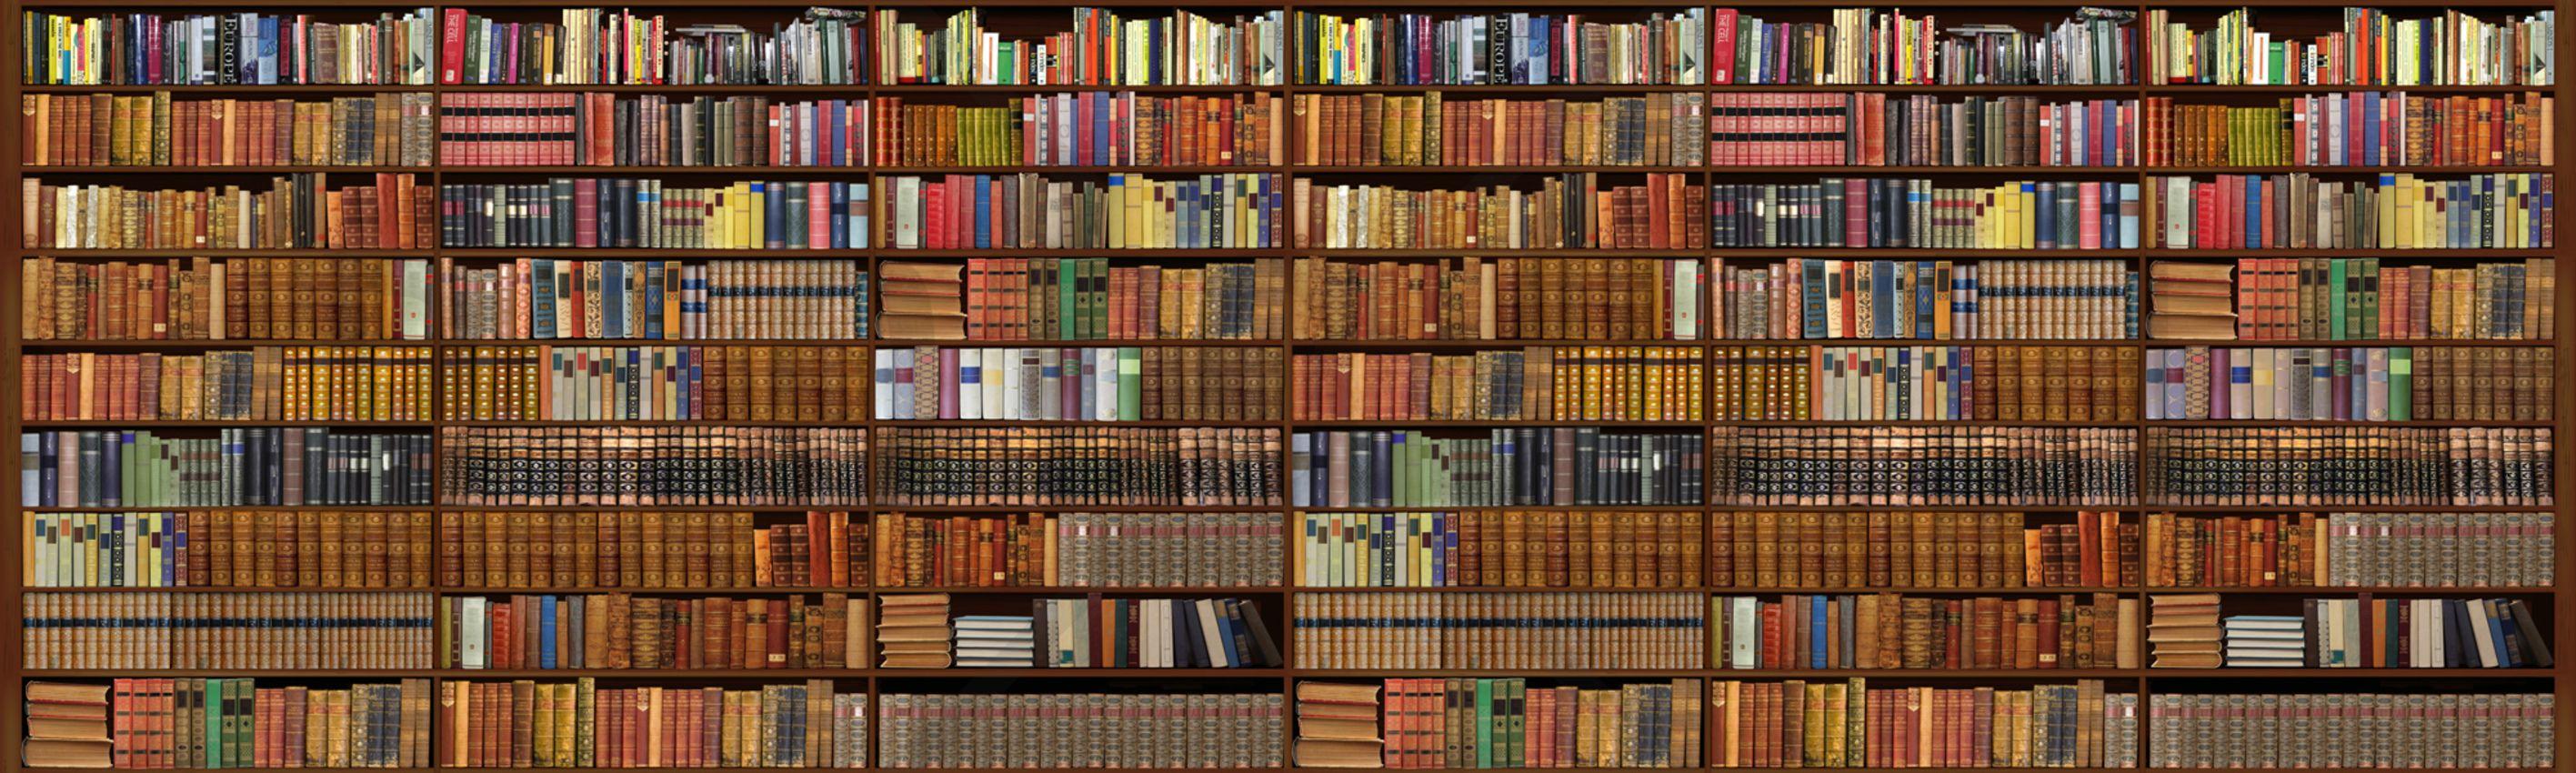 Awesome 46 Bookcase Wallpaper. HD Background BsnSCB